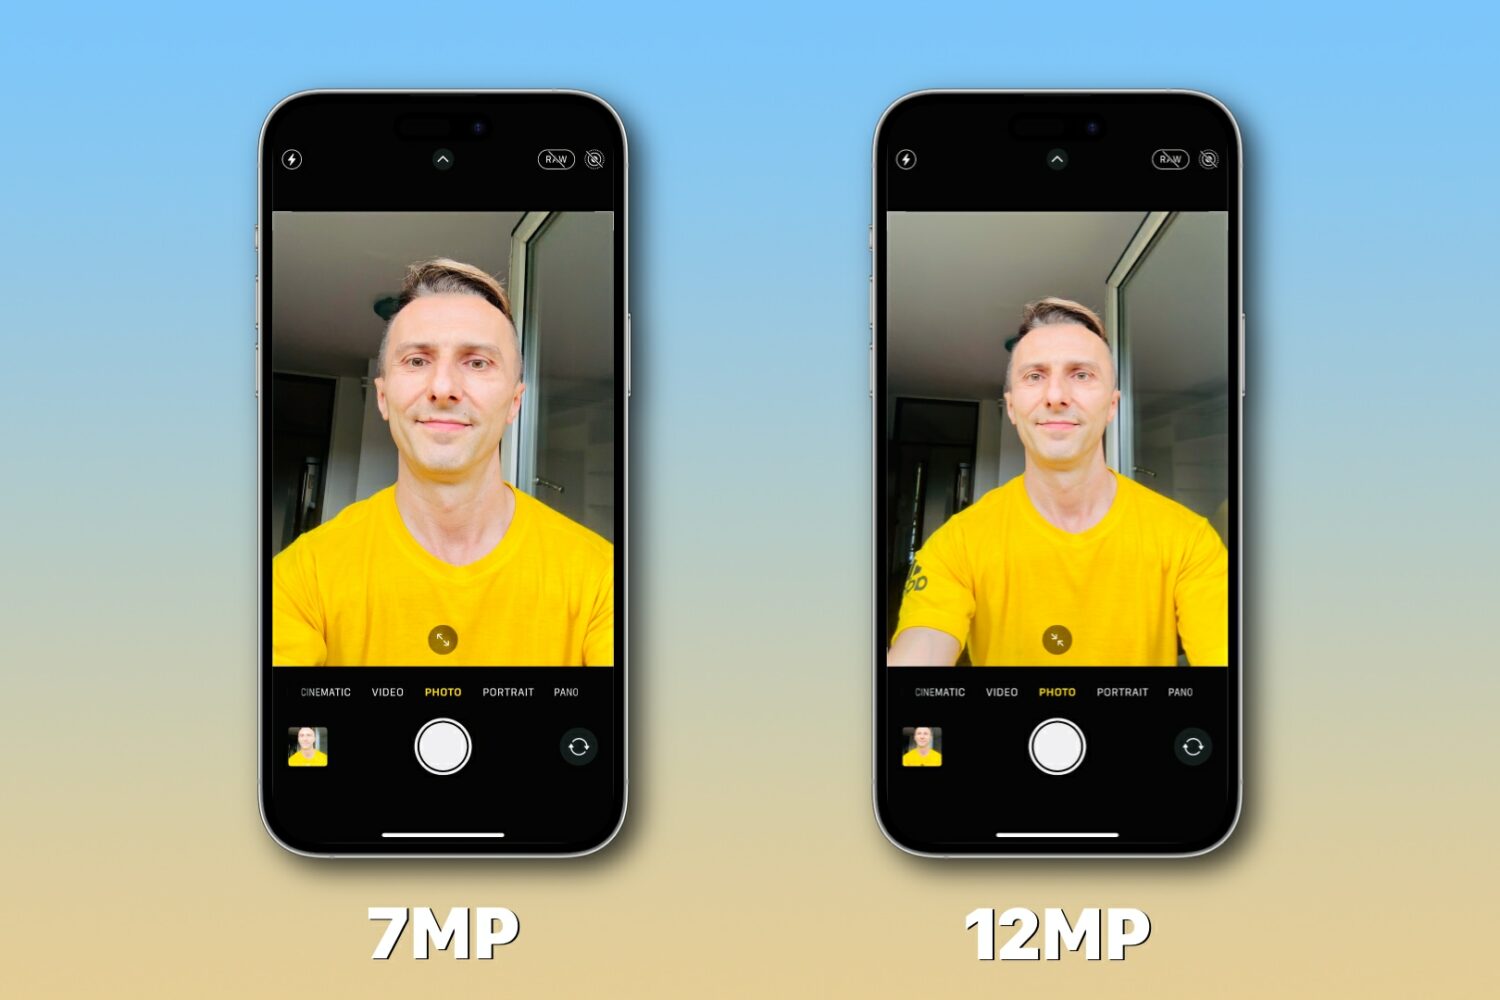 Side-by-side comparison between a 7MP iPhone selfie and a 12MP one